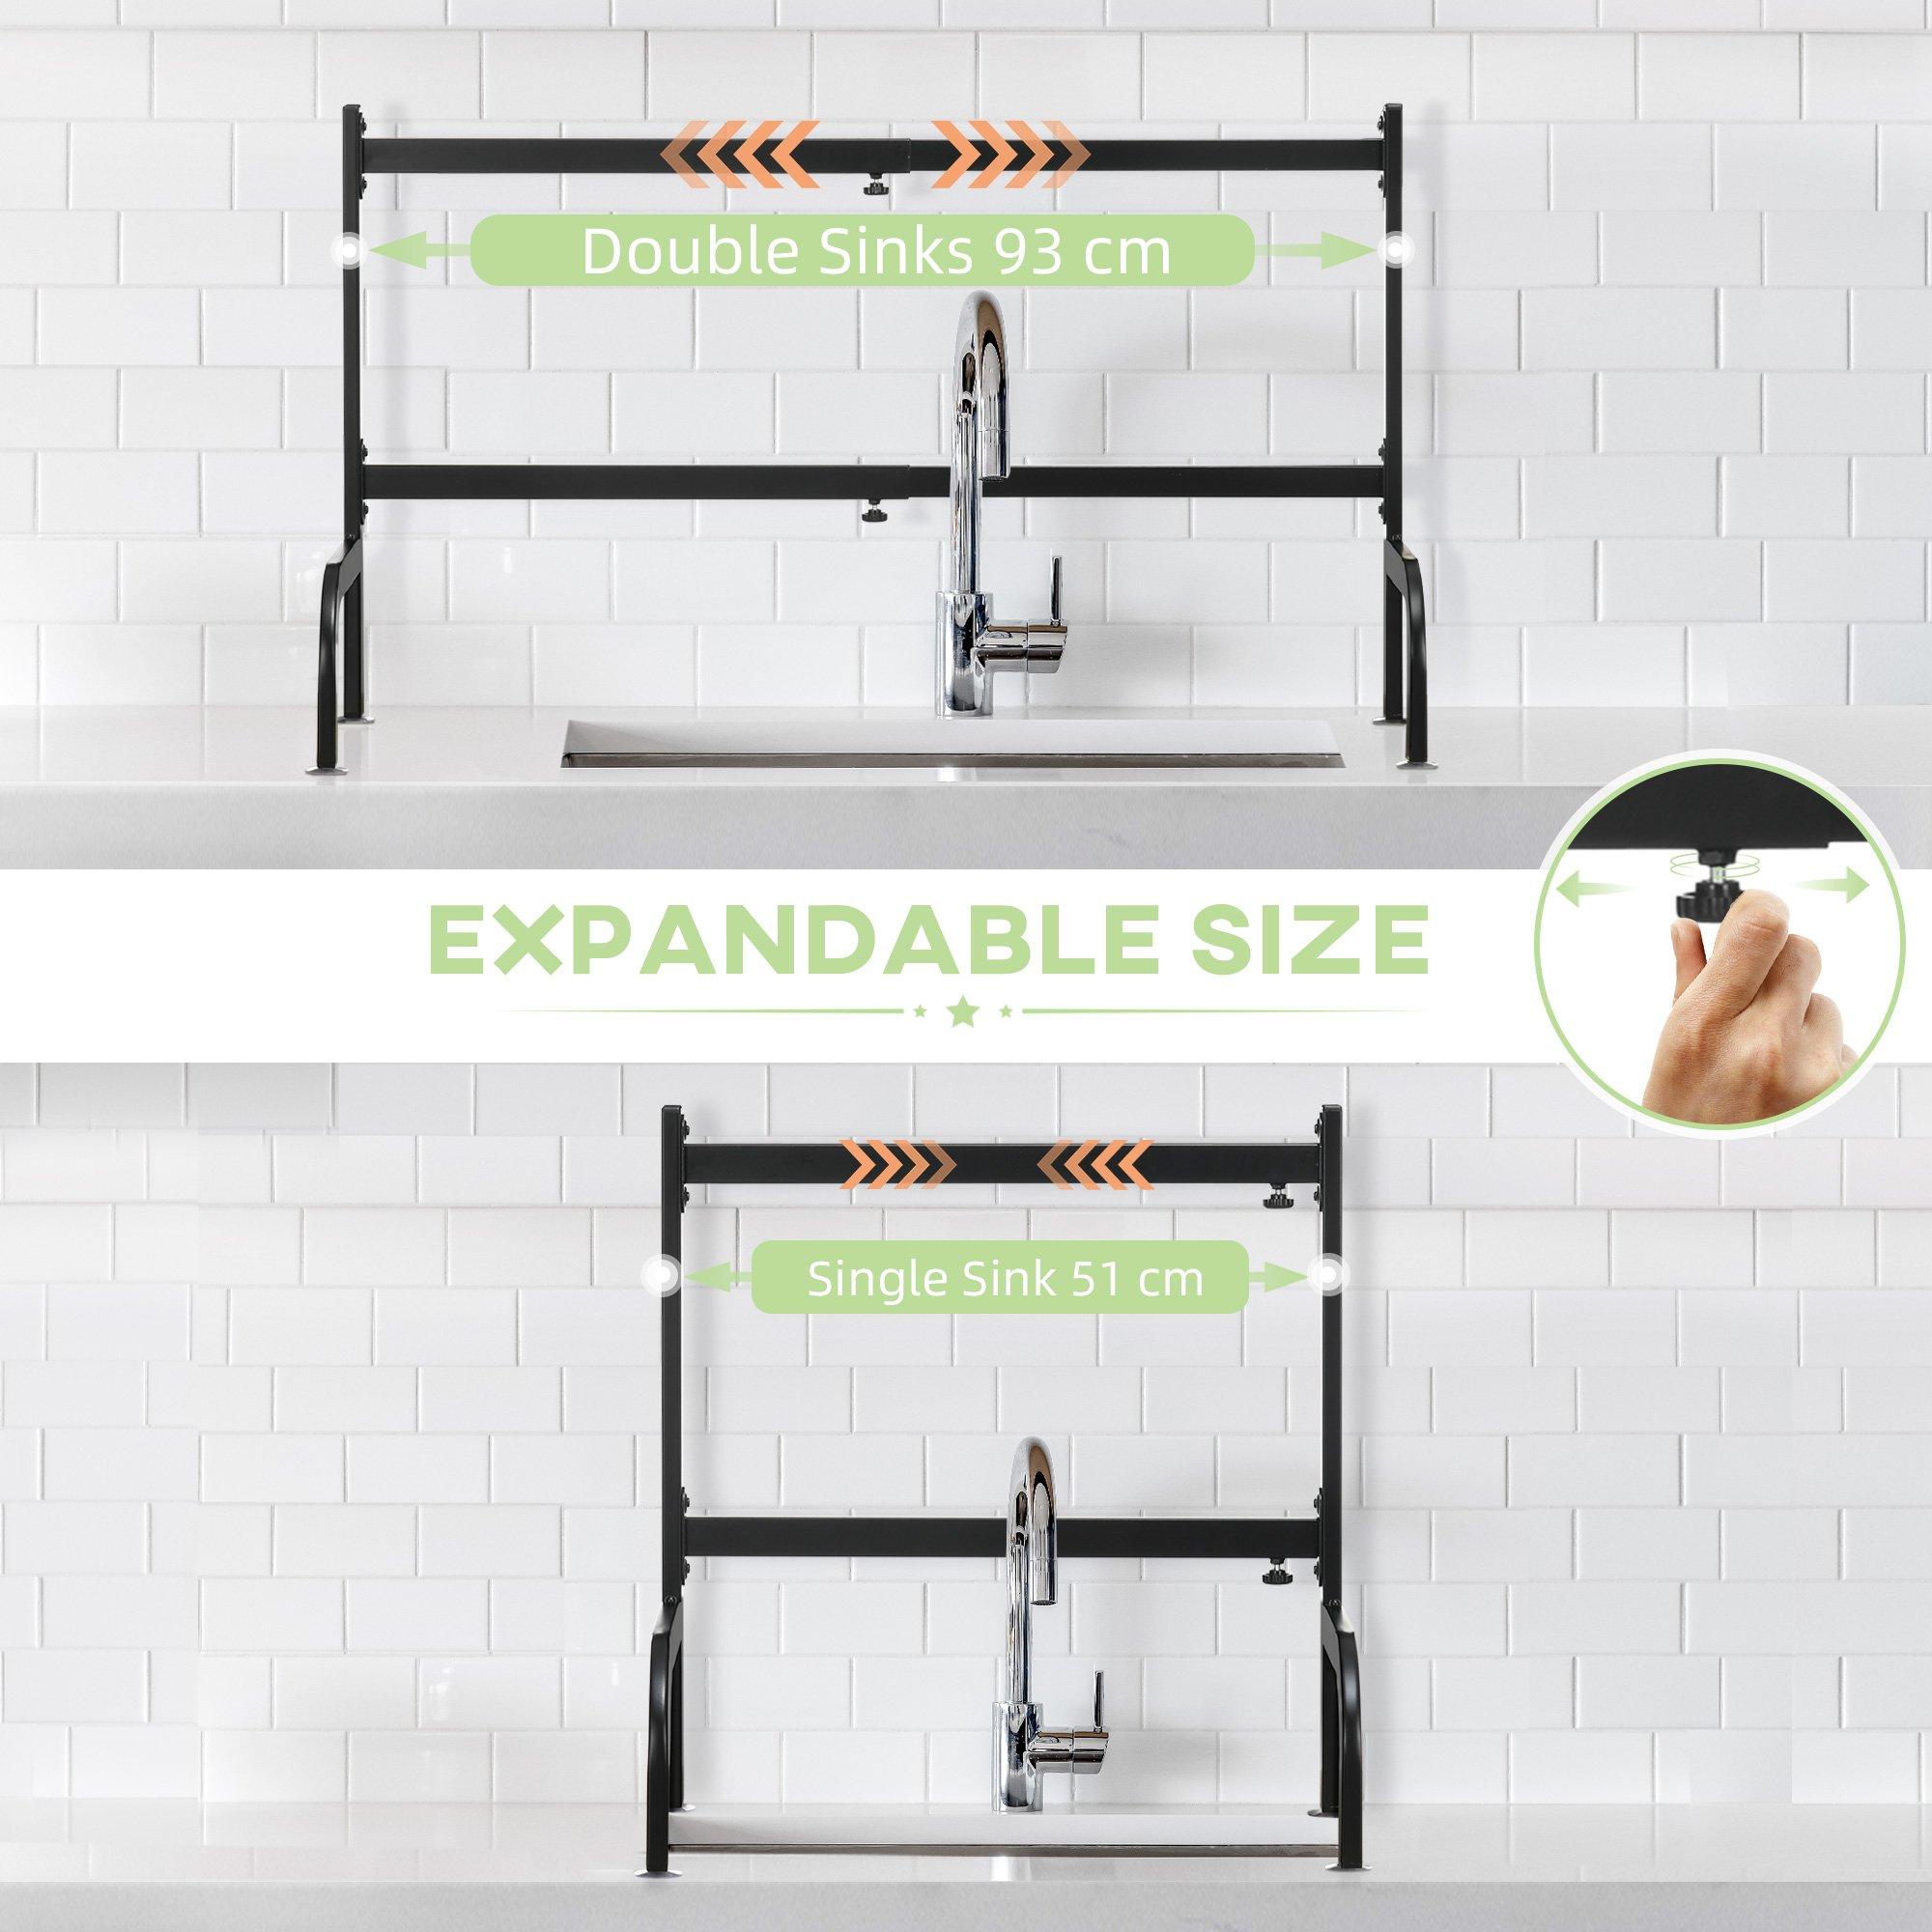 39.99$Dish Drying Rack,2-Tier Dish Racks for Kitchen Counter,Large